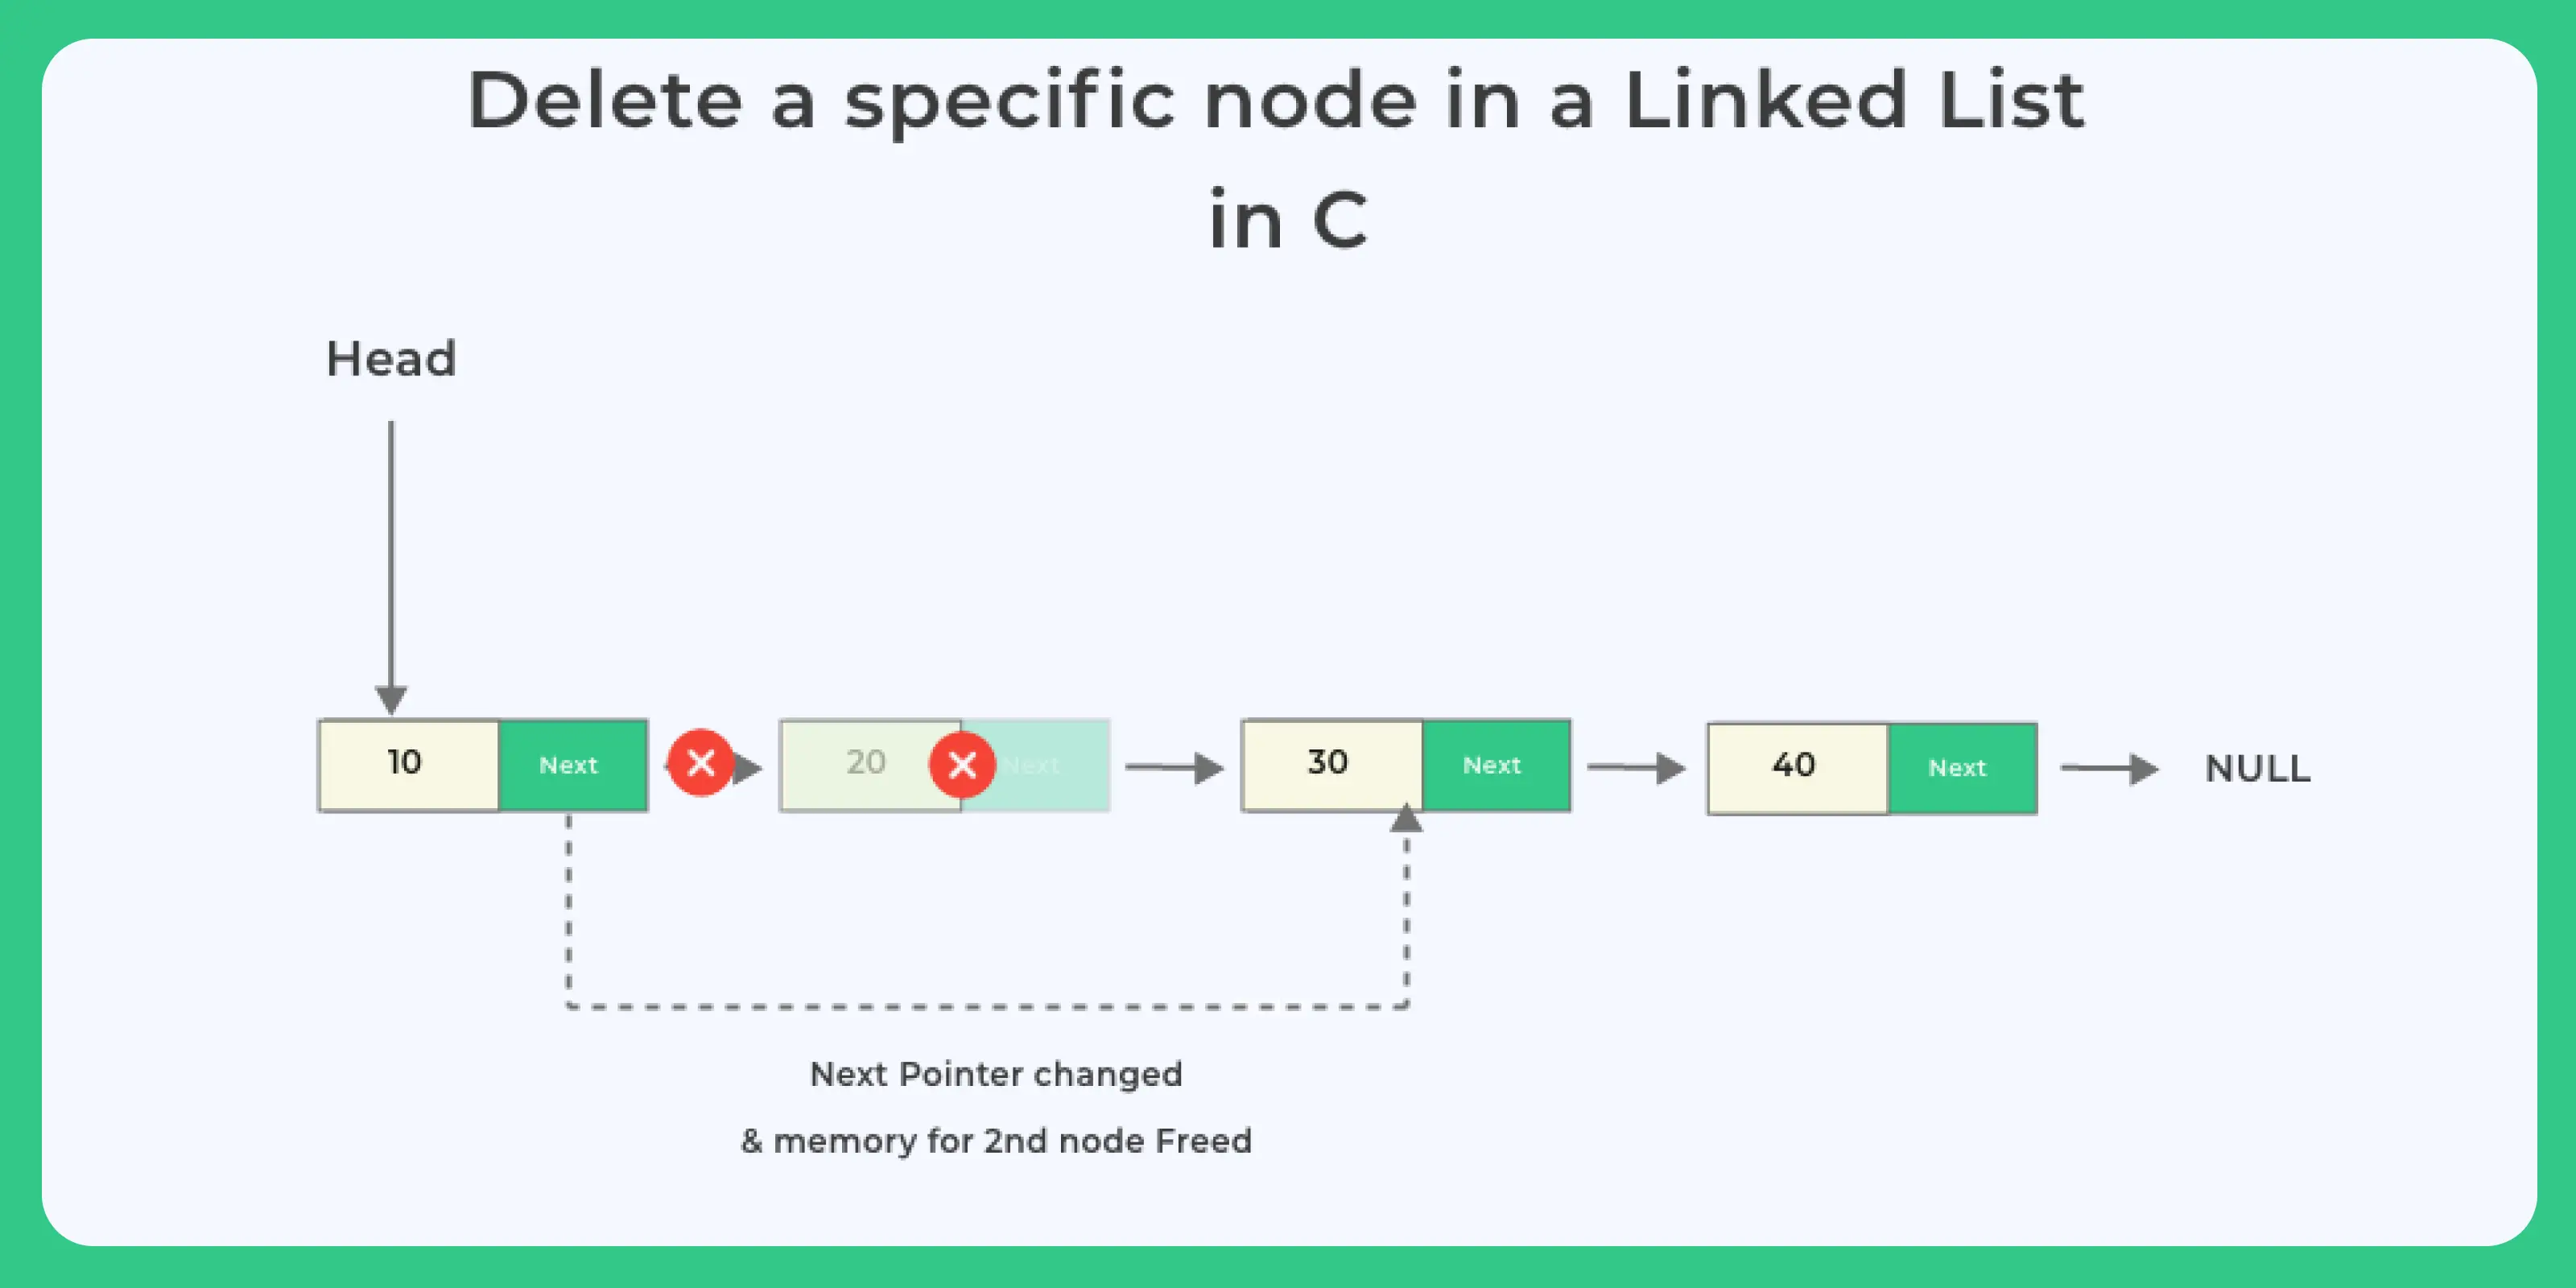 Delete a specfic node in a Linked List in C